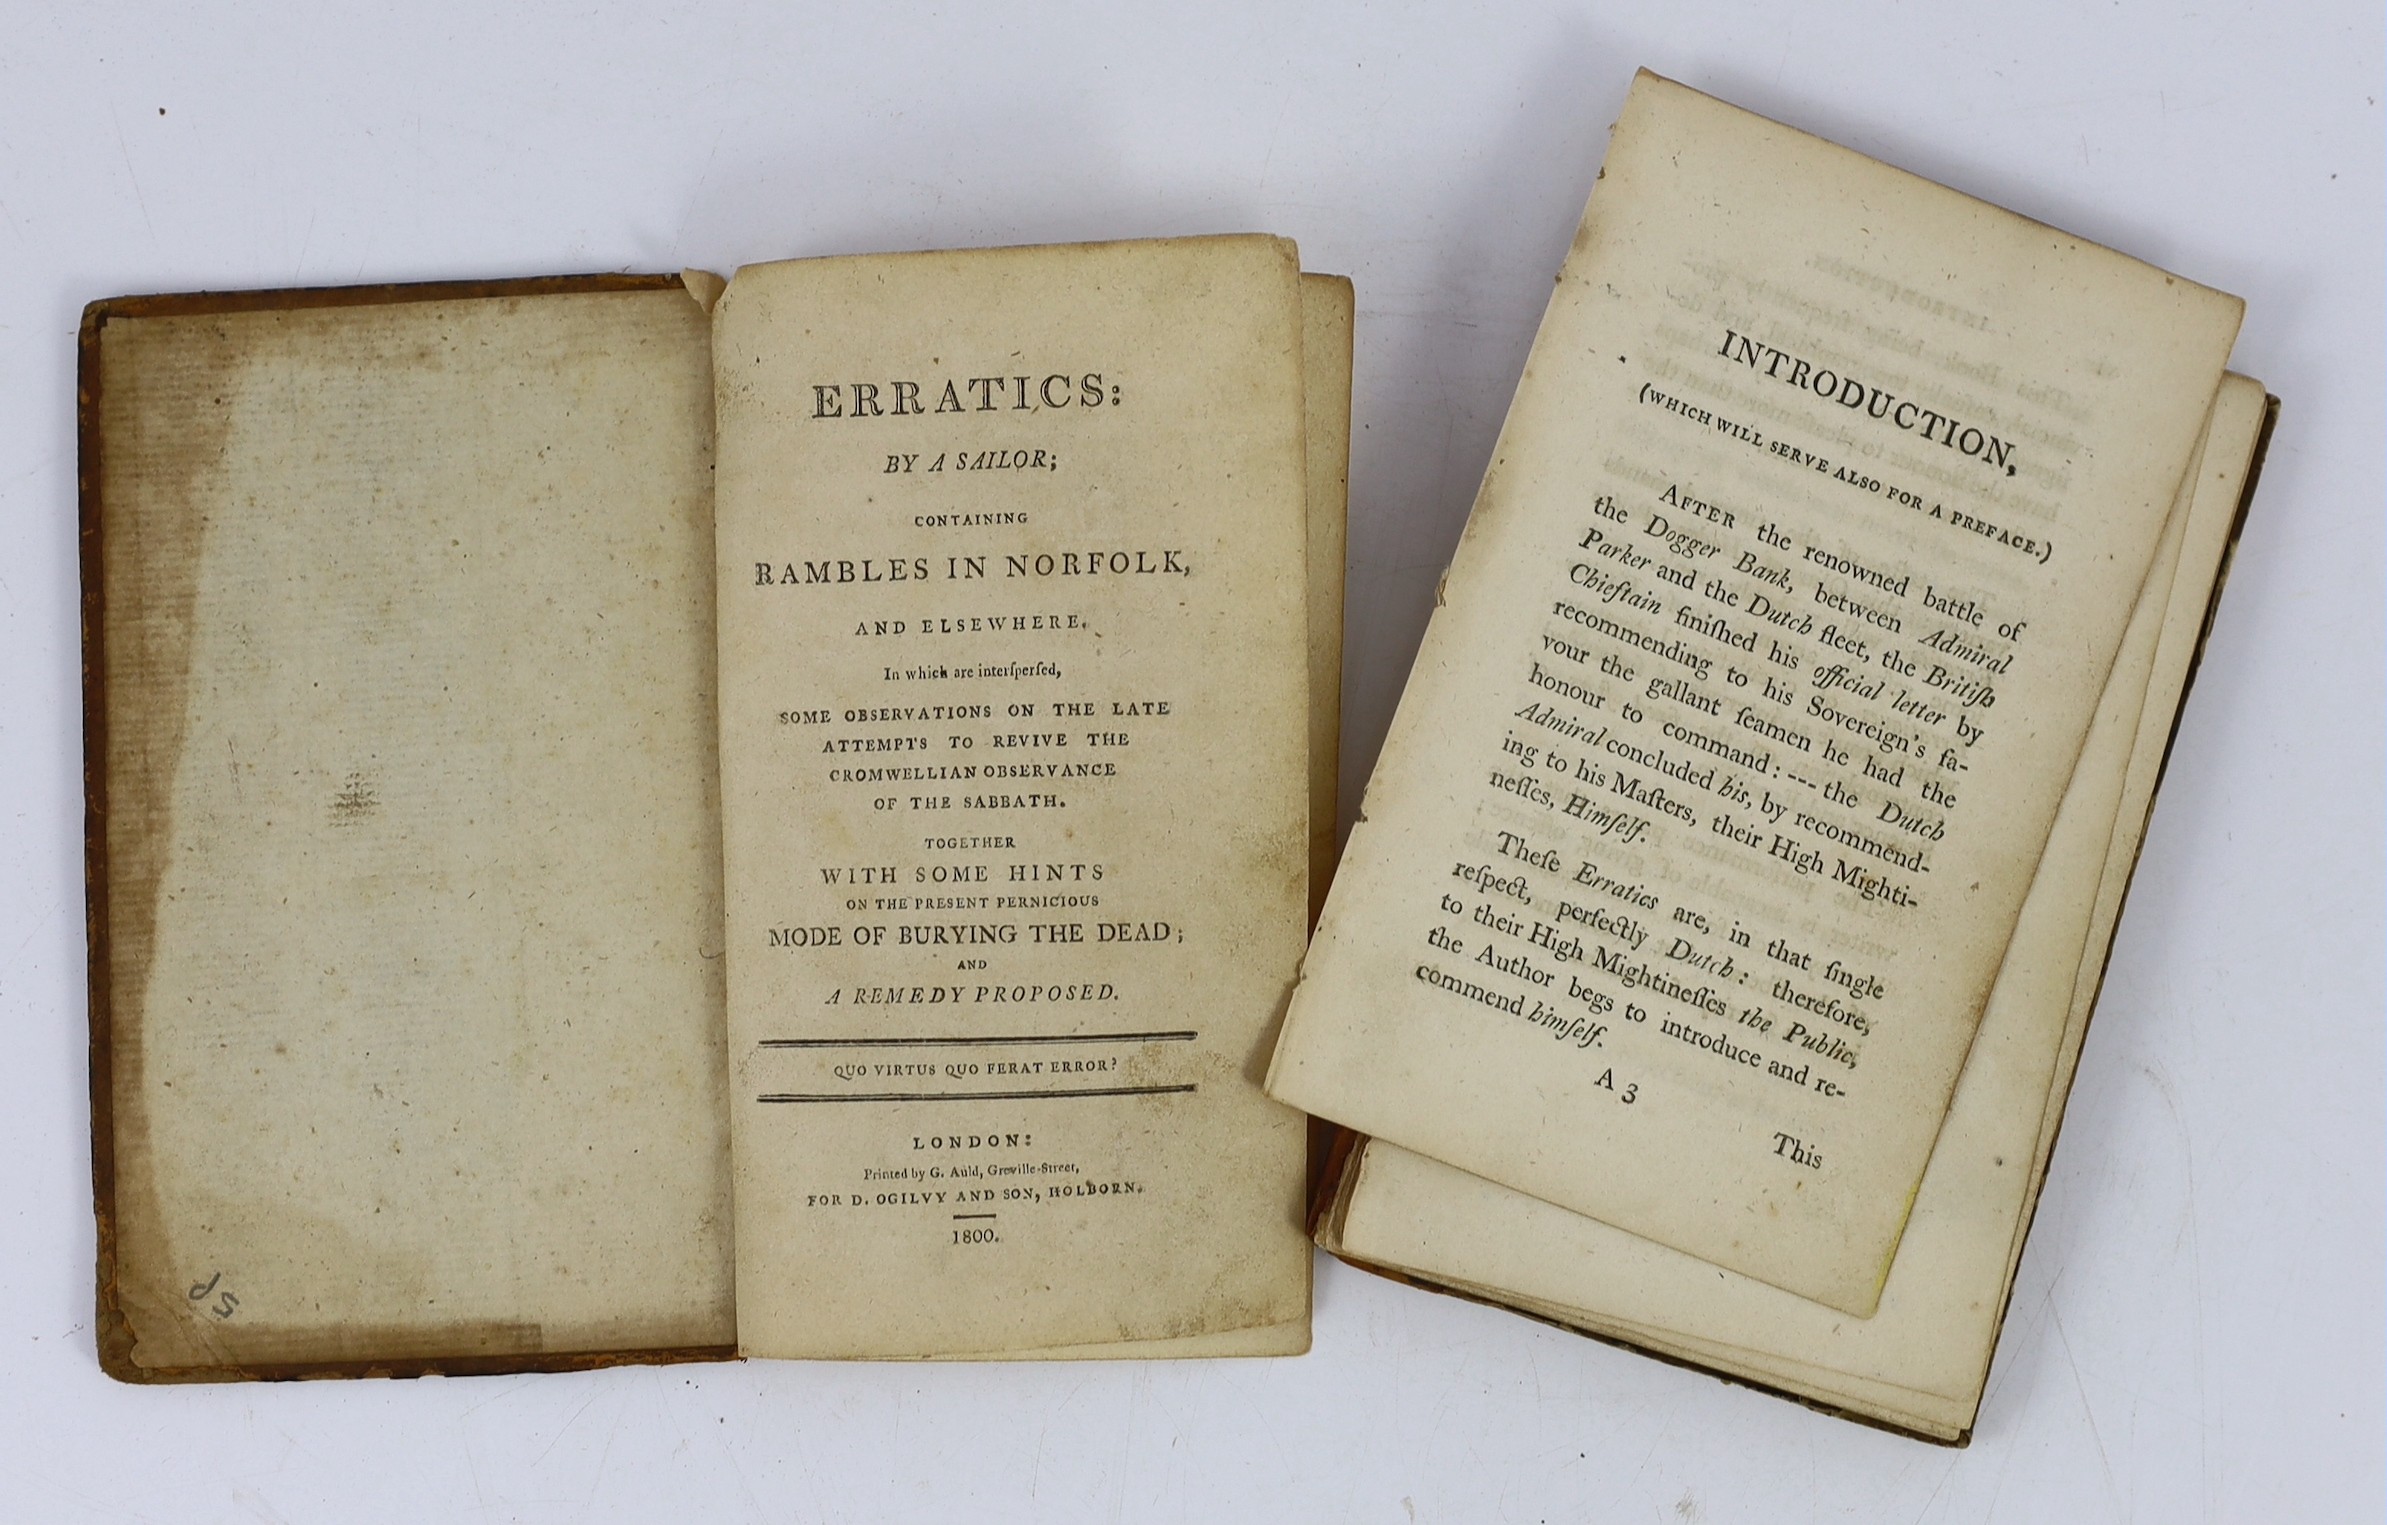 NORFOLK: Excursions in the County of Norfolk....forming a complete guide for the traveller and tourist. 2 vols. pictorial engraved and printed titles, folded map, folded plan and 96 plates; contemp. half morocco and marb